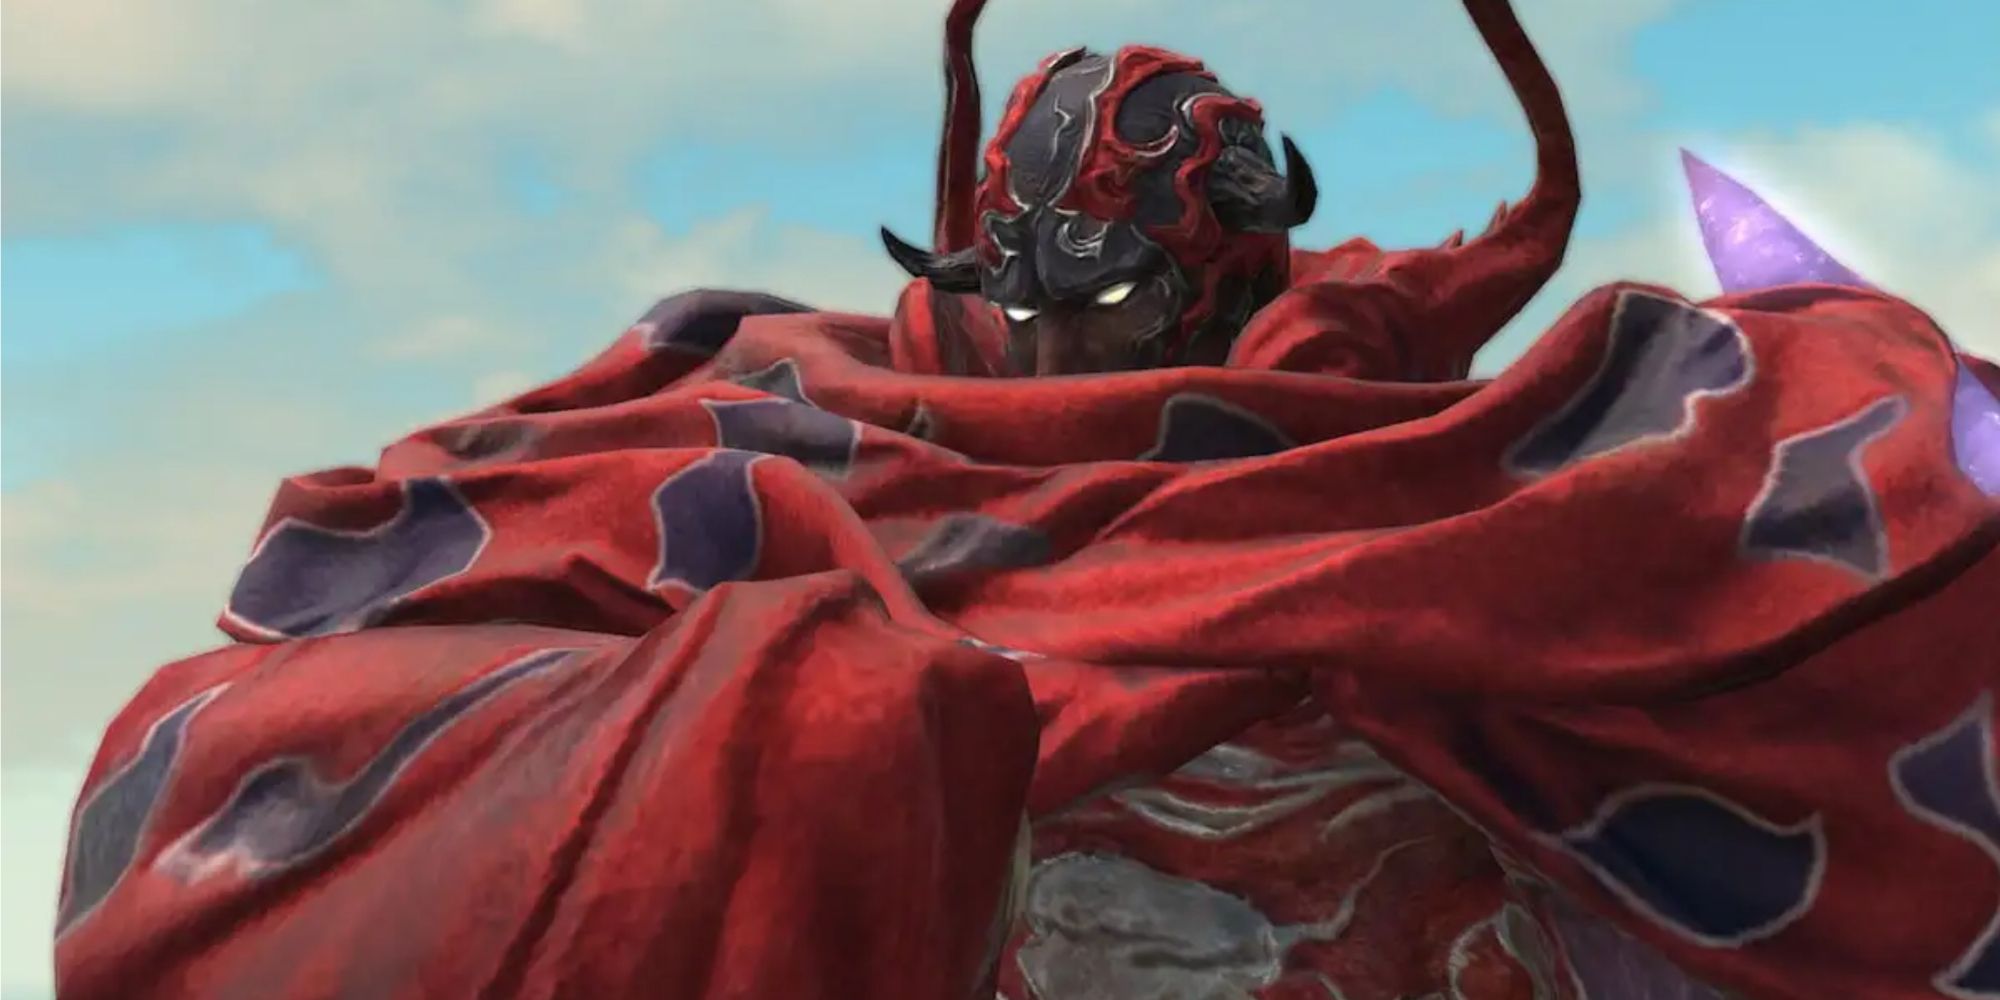 A close up on the face of the arch demon Rubicante during a cutscene before the Mount Ordeals Extreme Trial encounter in Final Fantasy 14